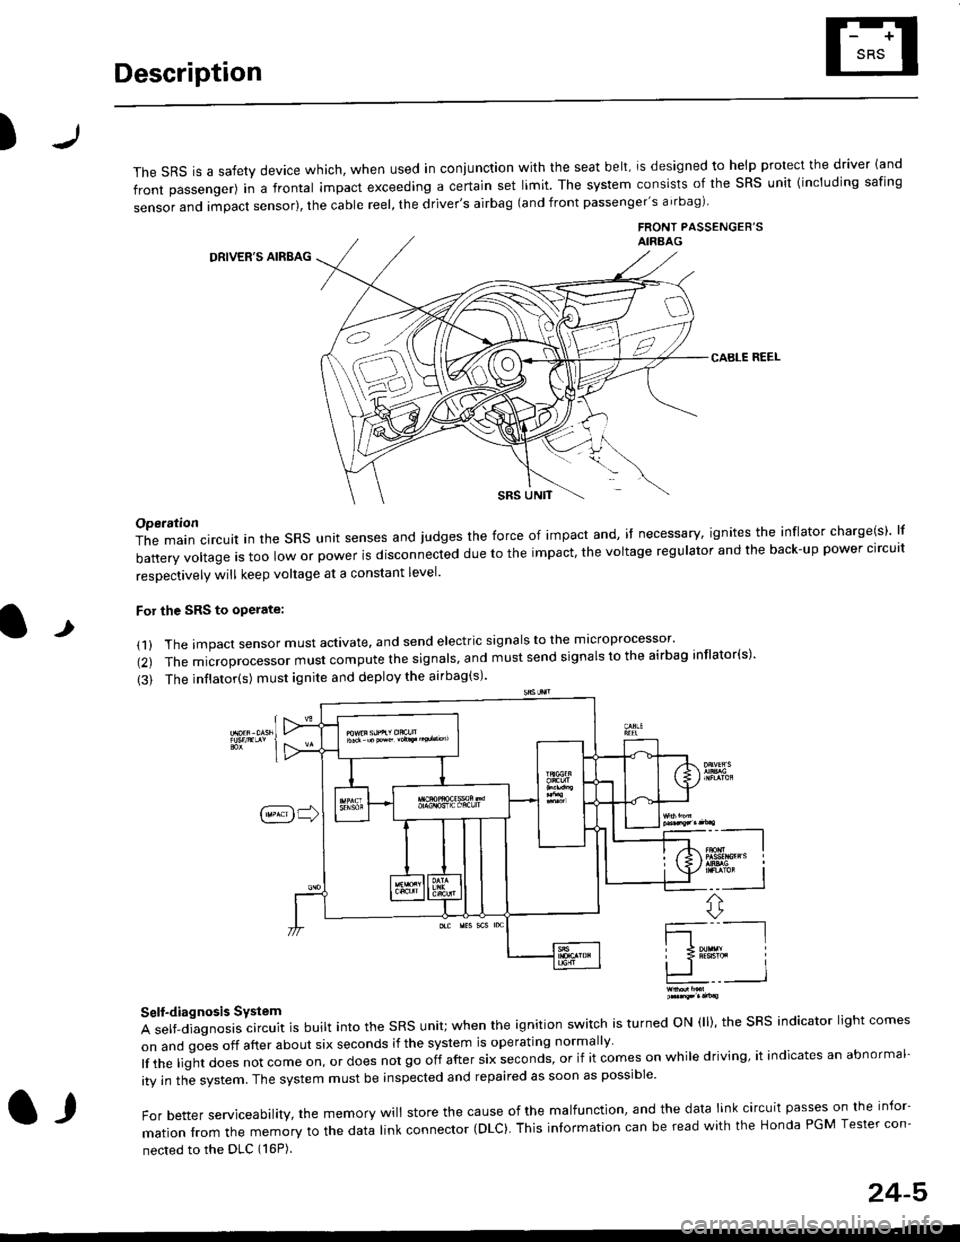 HONDA CIVIC 1996 6.G Workshop Manual Description
)
The sRS is a safety device which, when used in coniunction with the seat belt, is designed to help protect the driver land
front passenger) in a frontal impact exceeding a certain set li